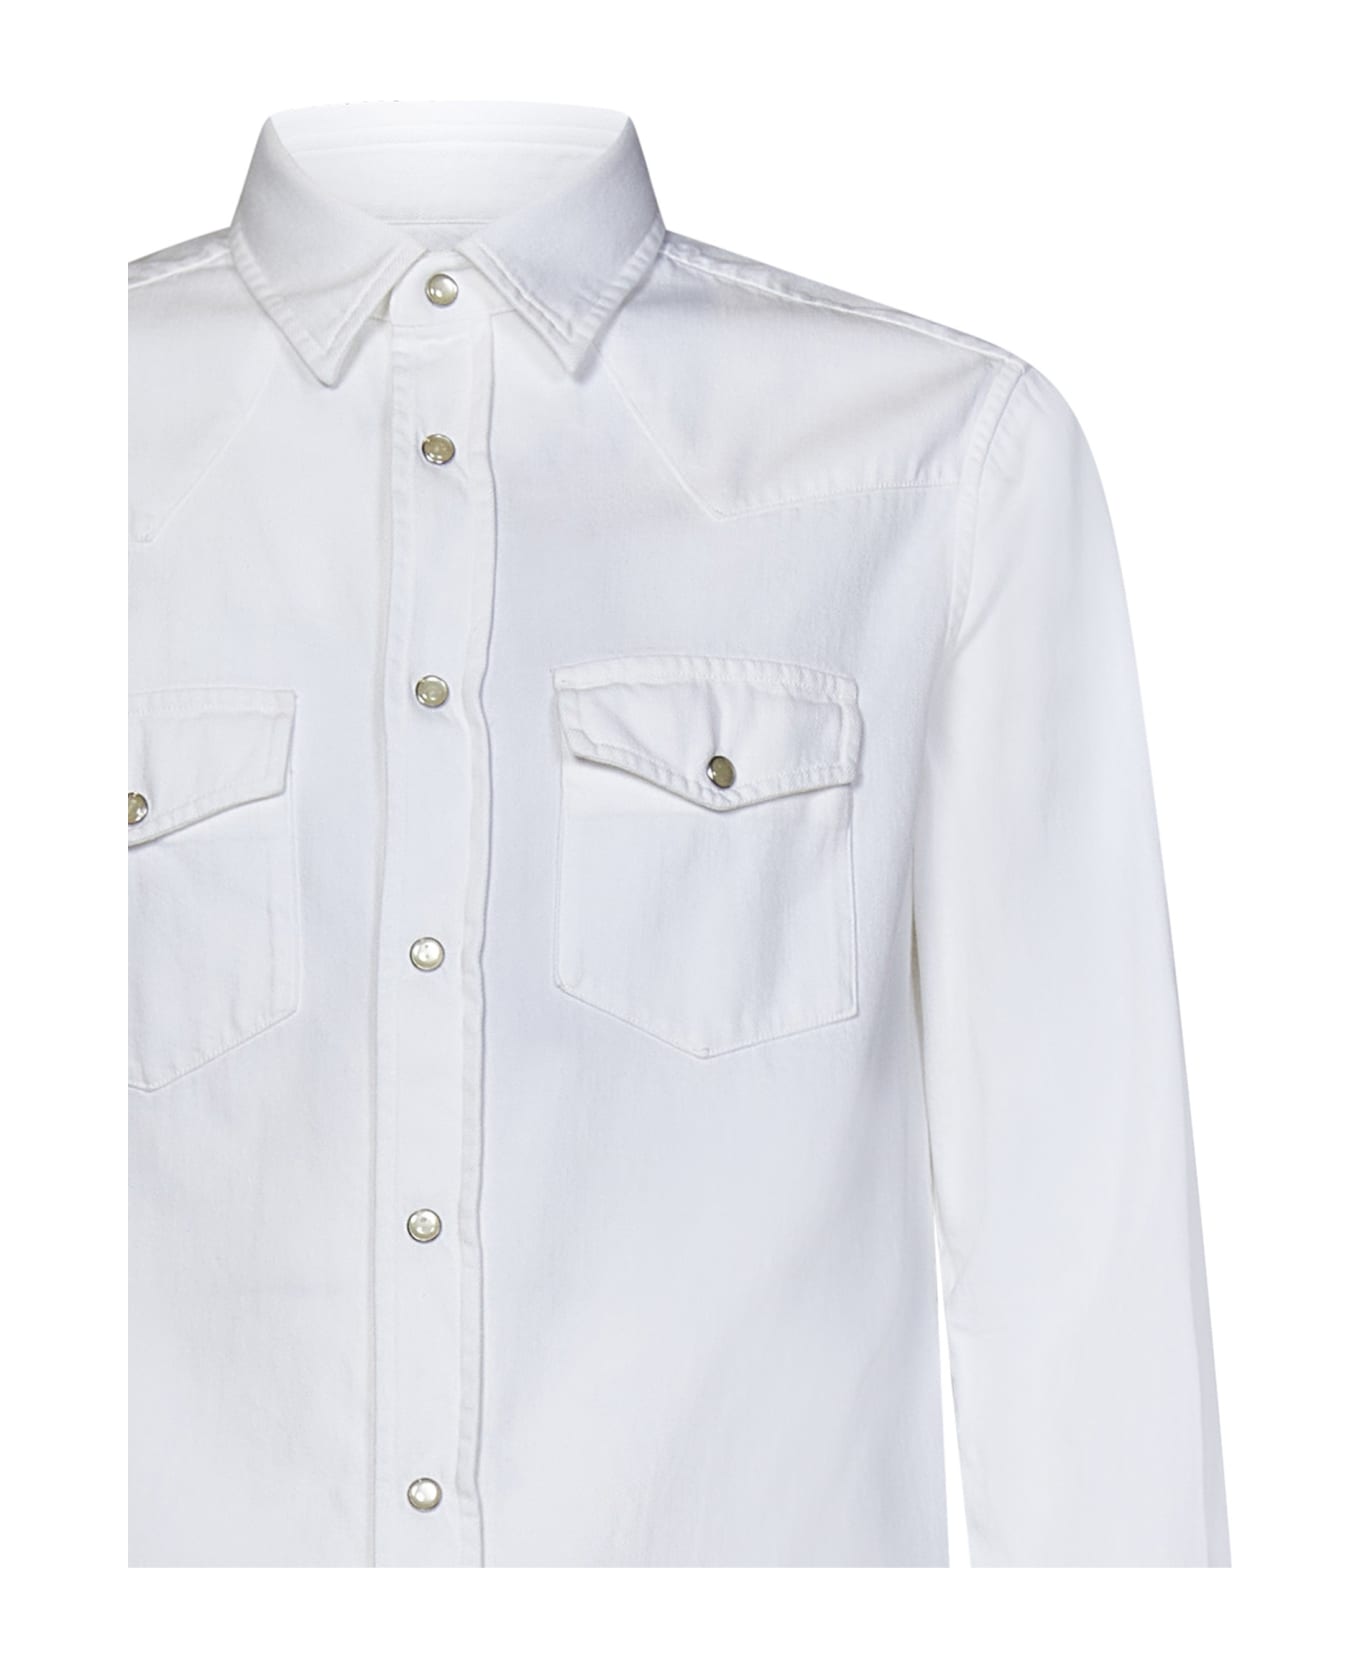 Tom Ford Patch Pocket Long-sleeved Shirt - White シャツ